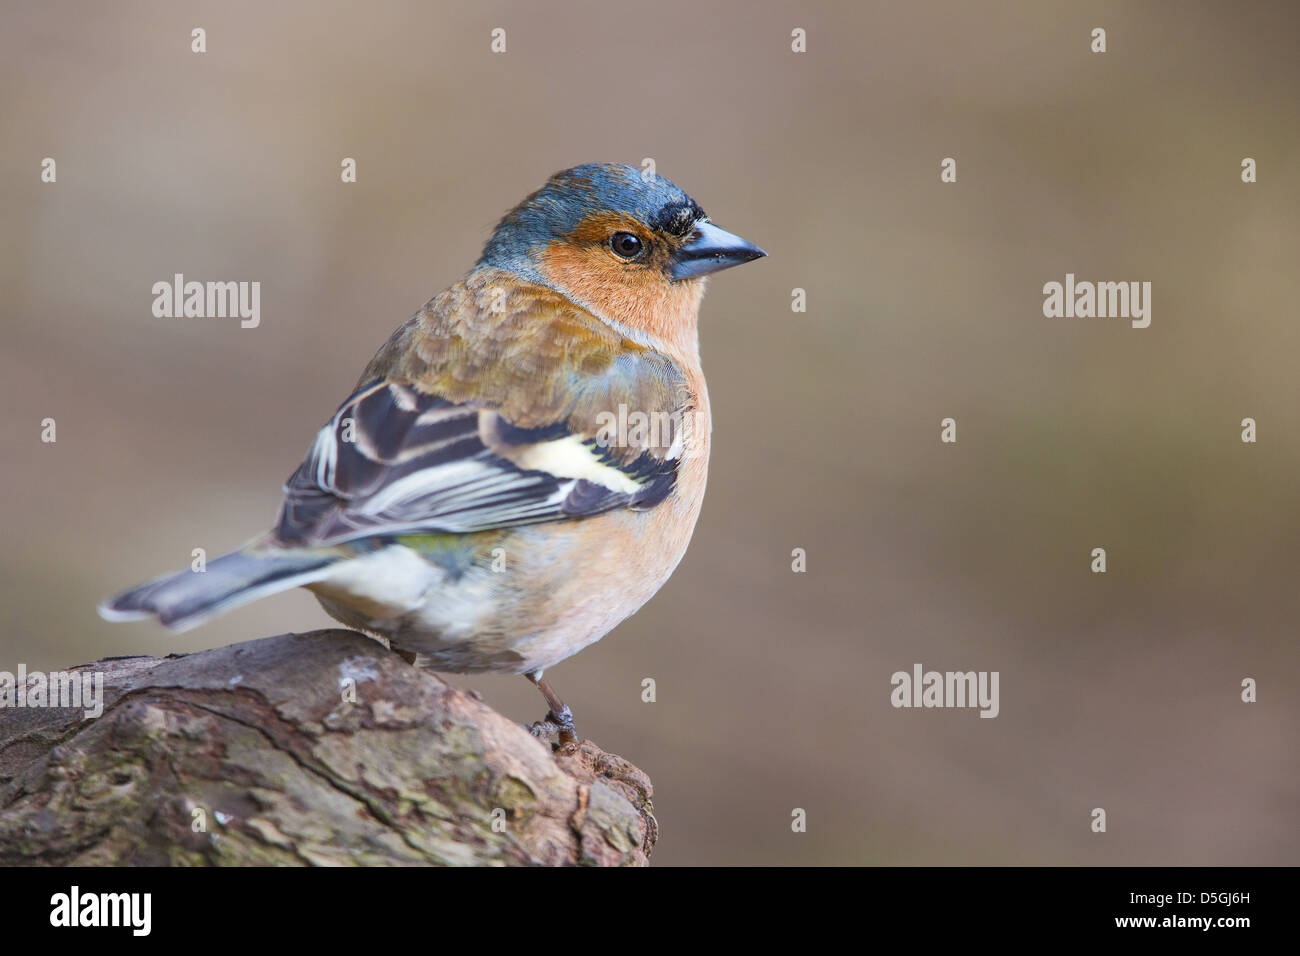 Male chaffinch (Fringilla coelebs) standing on a tree stump, soft focus green brown background Stock Photo